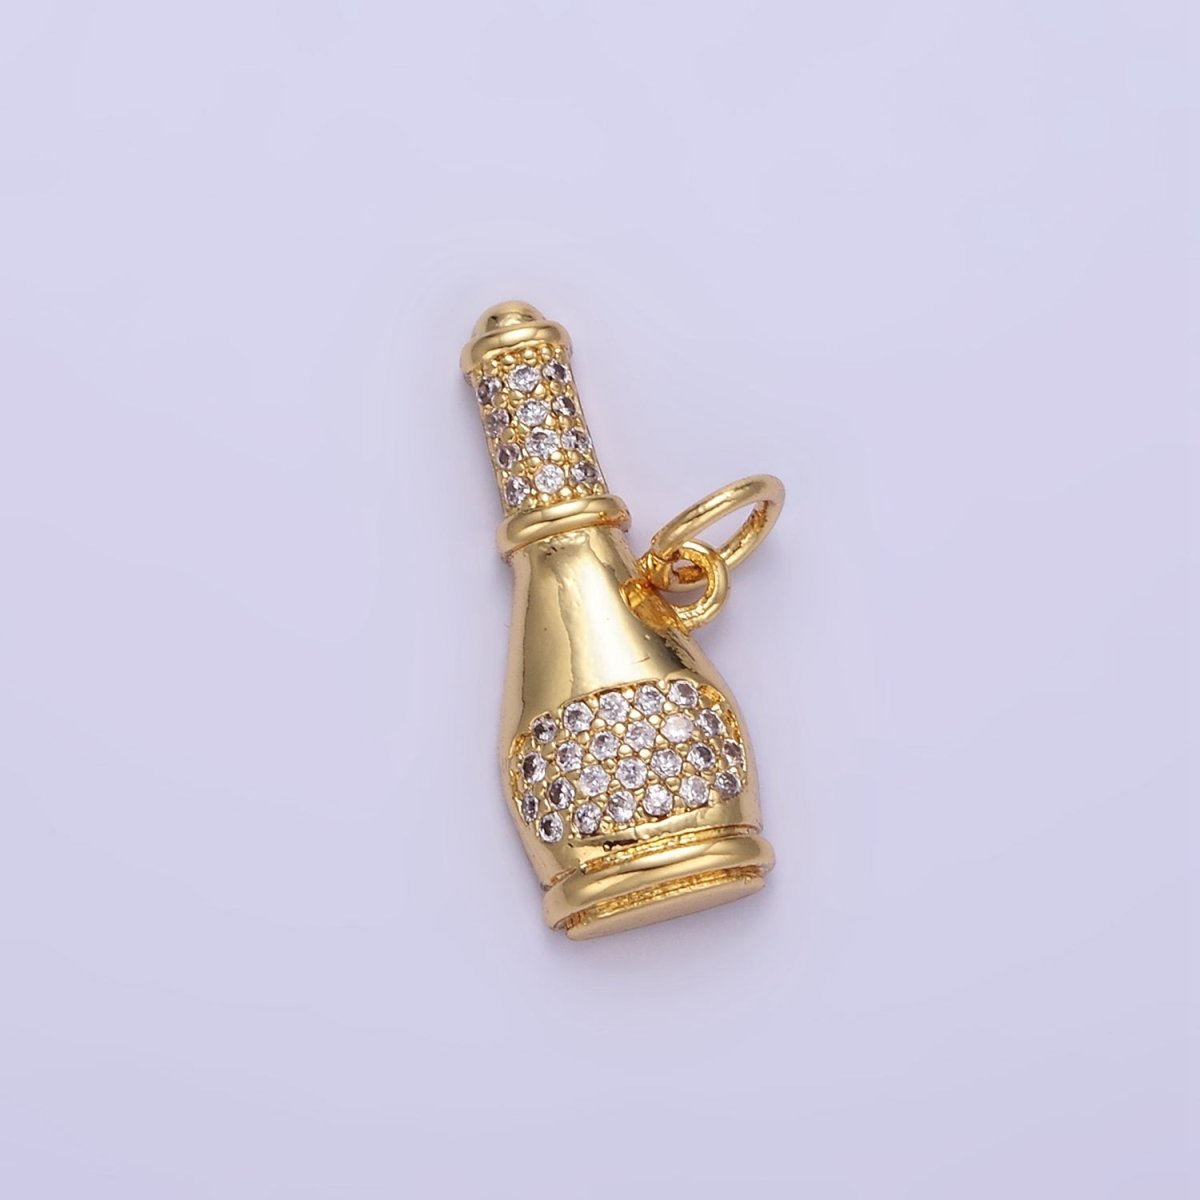 24K Gold Filled Micro Paved CZ Champagne Alcohol Charm | E350 - DLUXCA